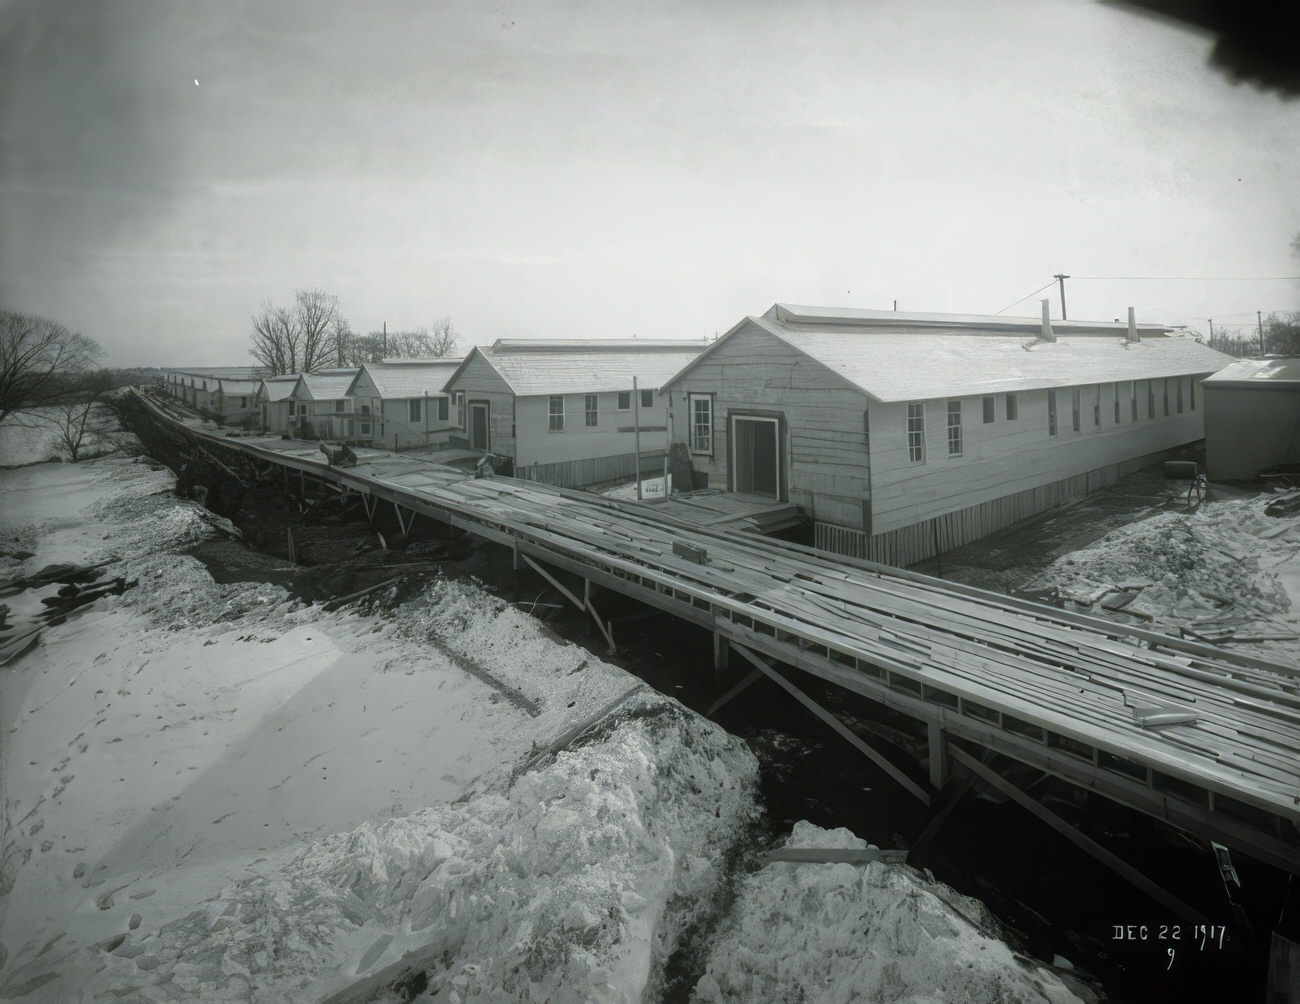 Gun Hill Road, Base Hospital No. 1, North Section Looking East, December 1917.